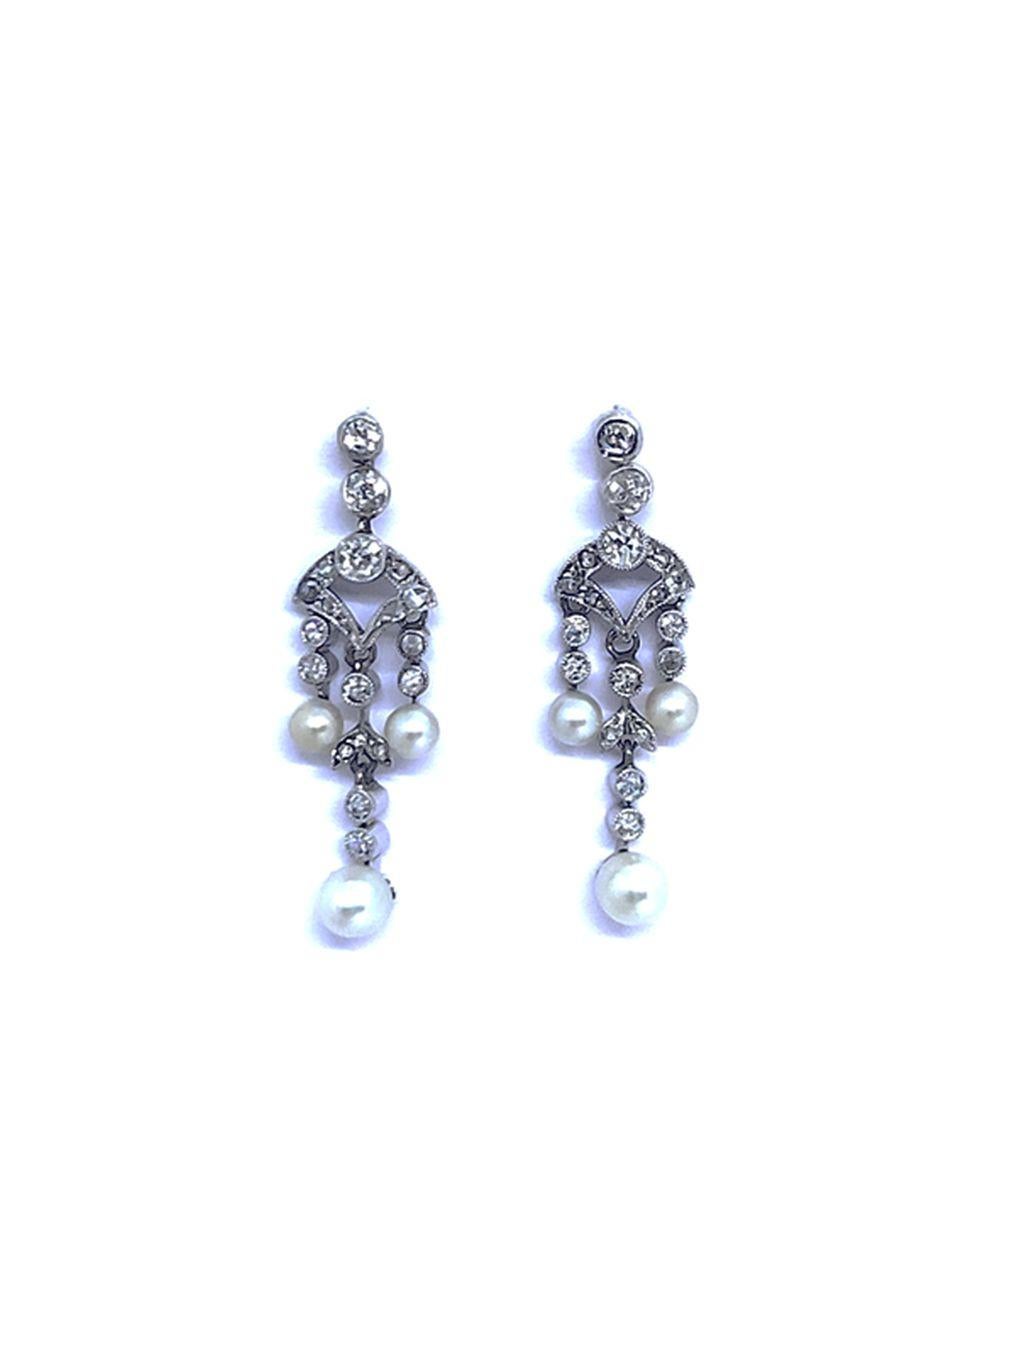 Earrings White Gold Diamonds Seed Pearls Edwardian ca. 1910 For Sale 1